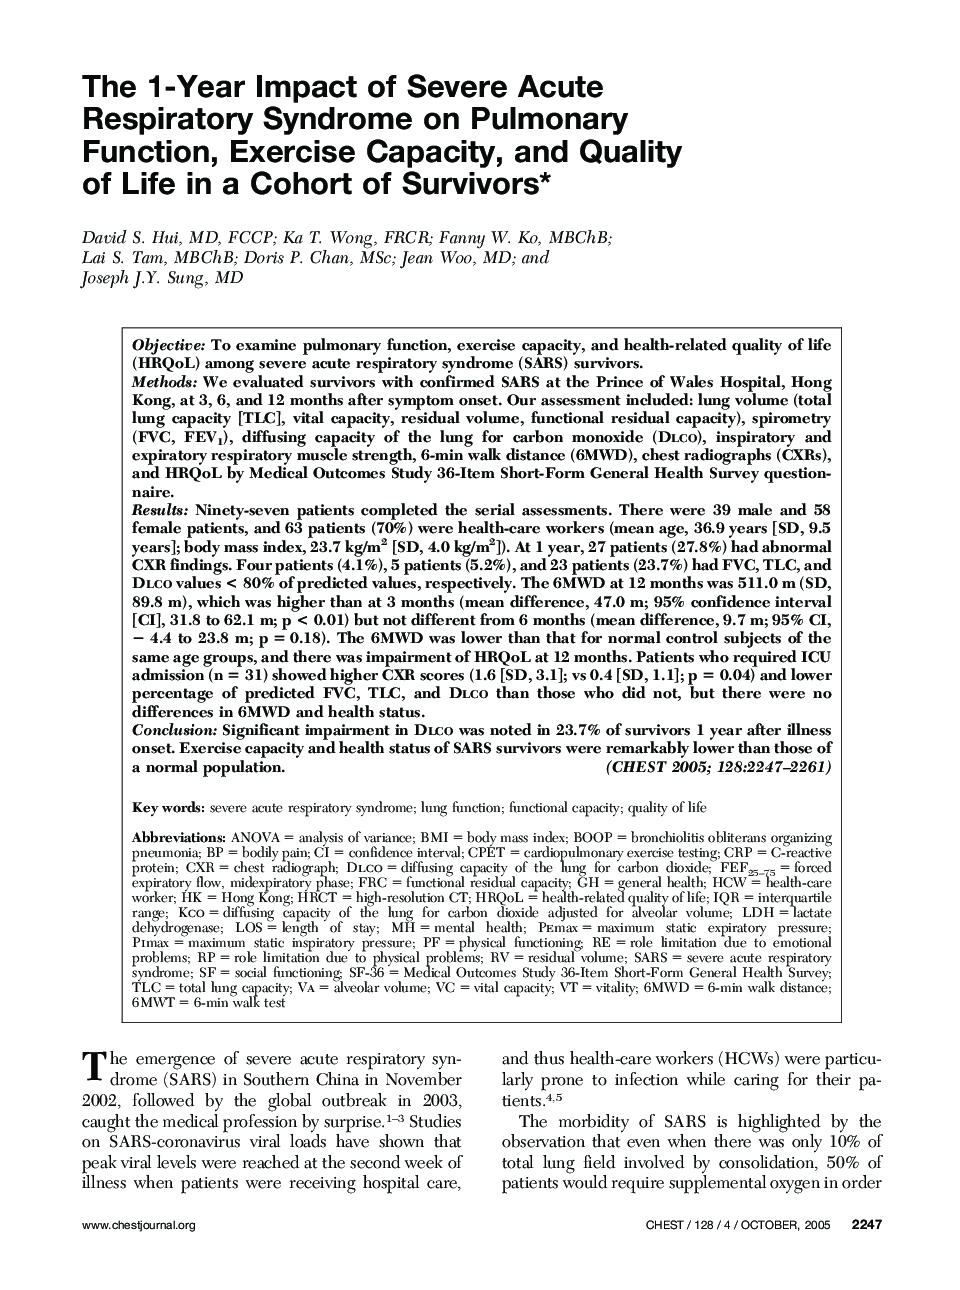 The 1-Year Impact of Severe Acute Respiratory Syndrome on Pulmonary Function, Exercise Capacity, and Quality of Life in a Cohort of Survivors